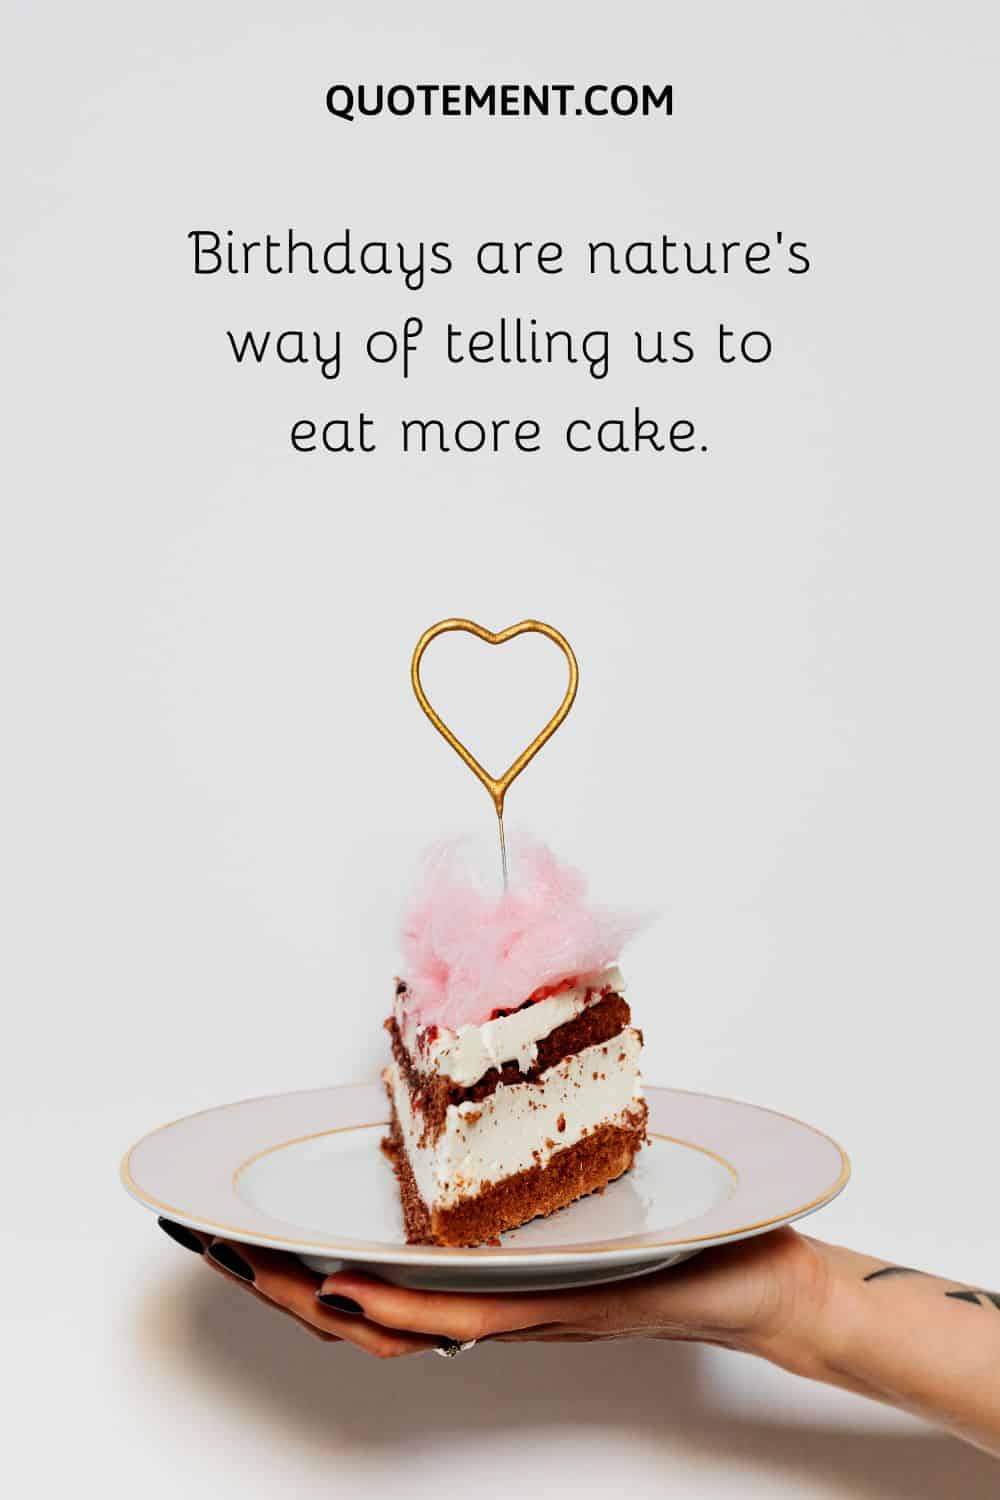 Birthdays are nature’s way of telling us to eat more cake